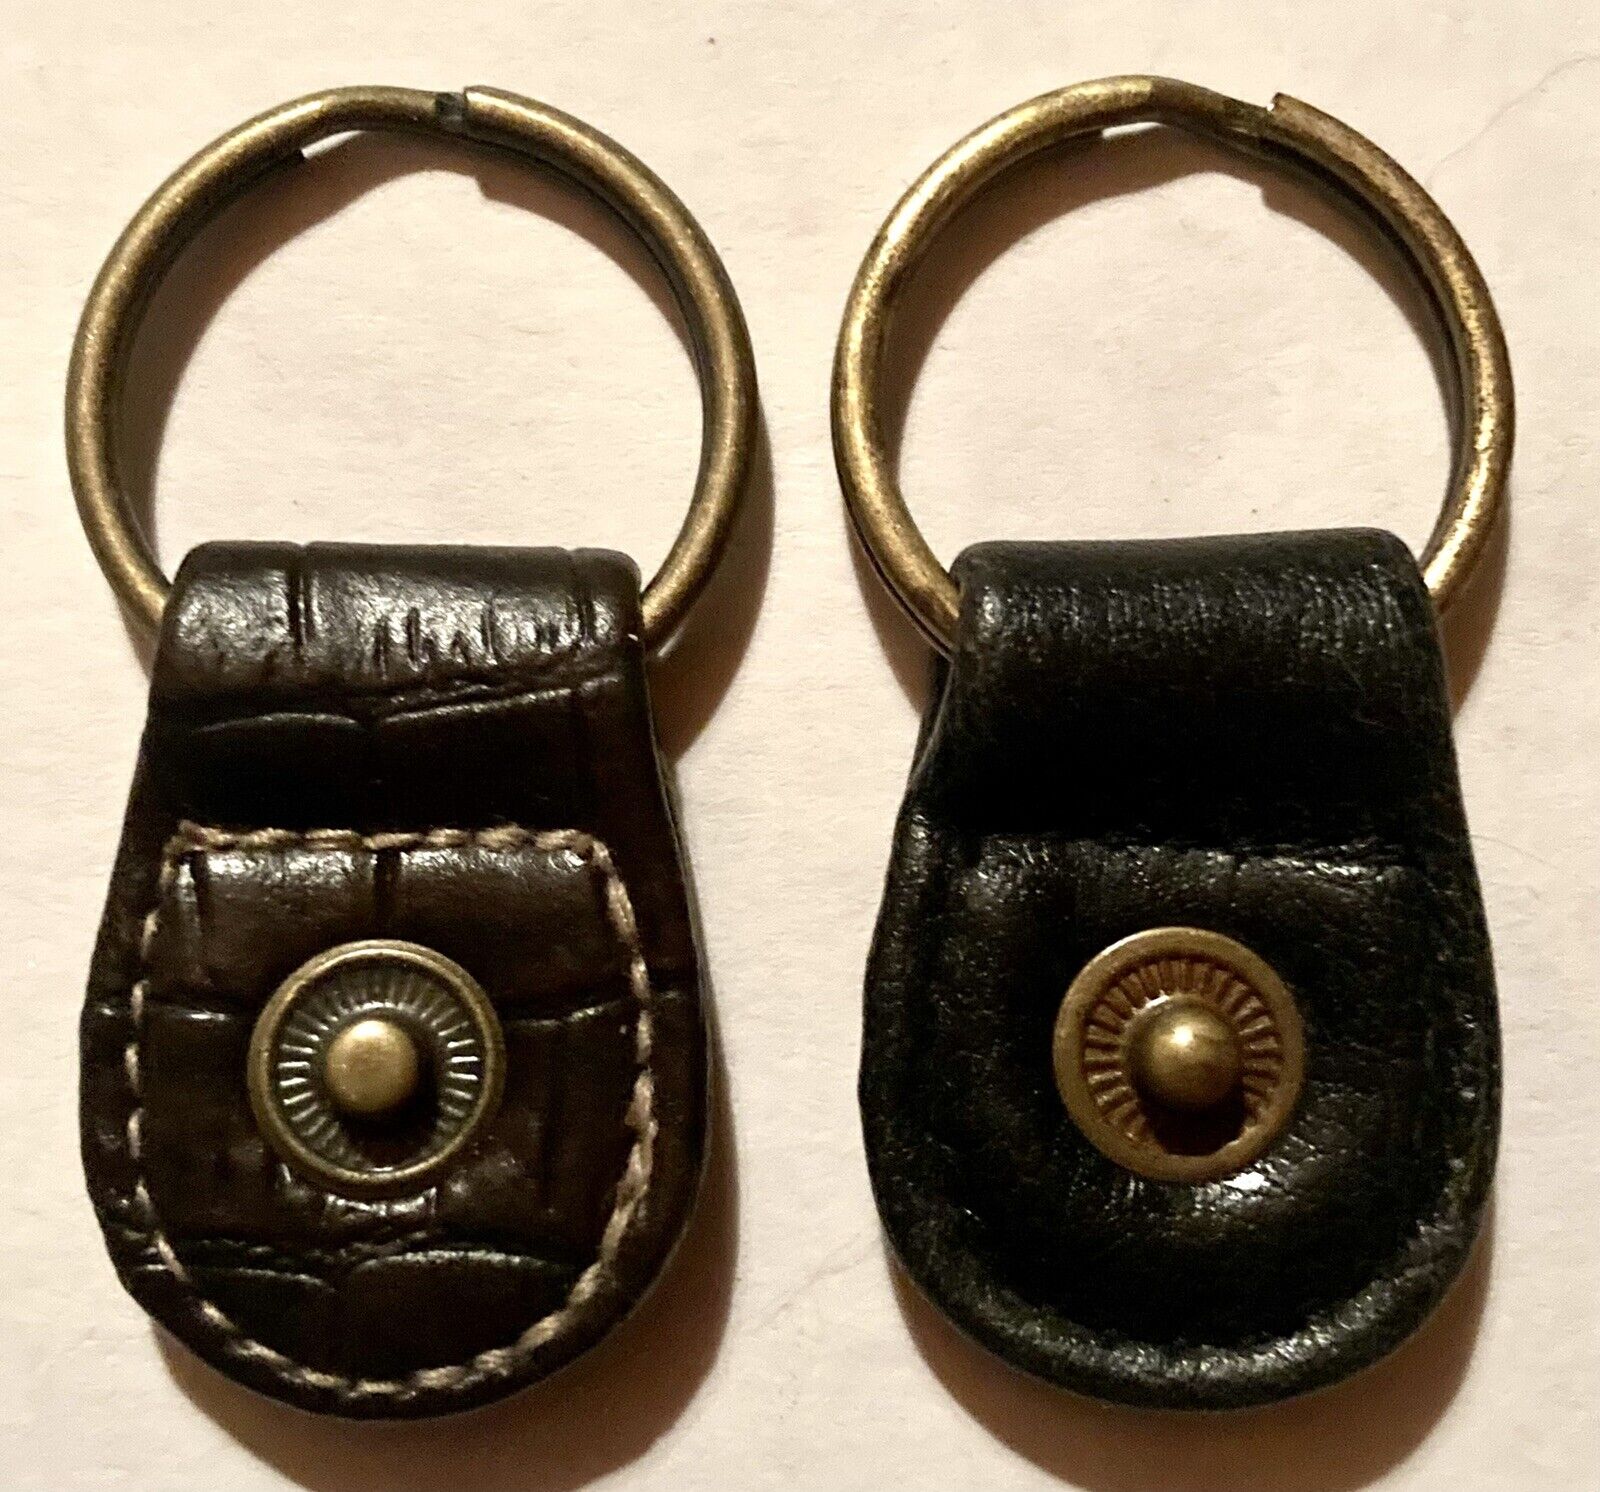 BLACK & BROWN LEATHER KEYCHAIN WITH METAL CLASP CENTER VINT 1980S 2 KEYCHAIN SET